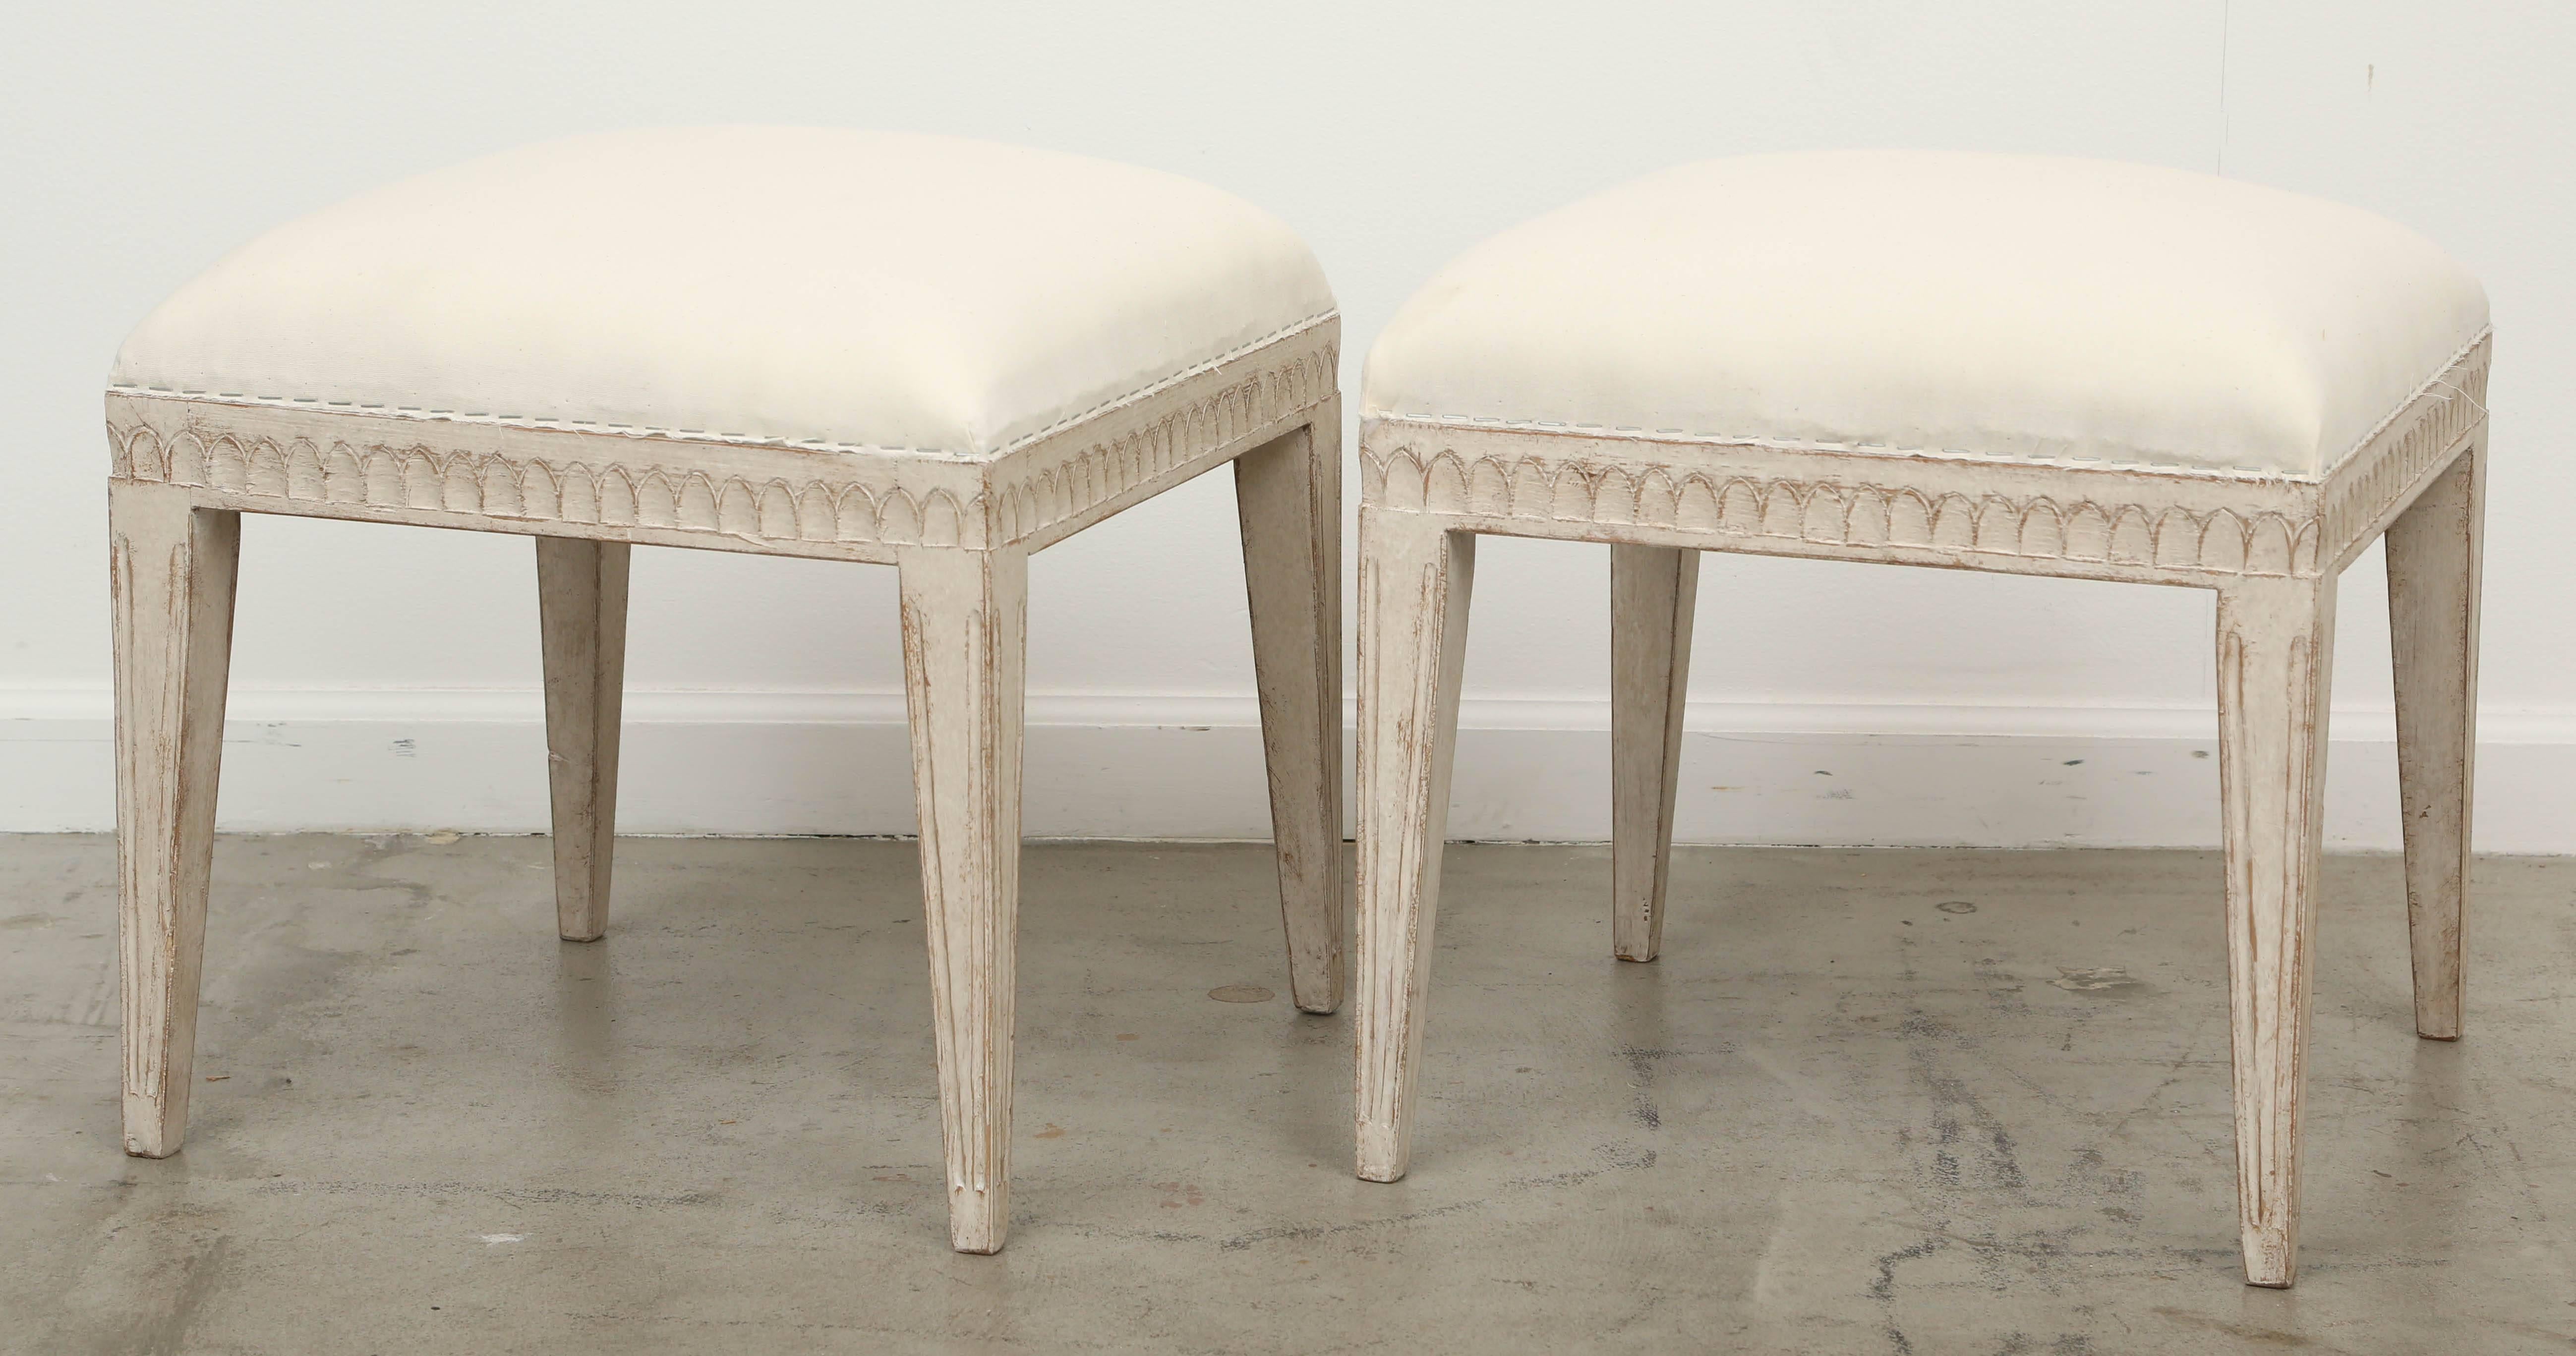 Pair of Swedish Gustavian painted stools, mid-19th century. 
Carved lambs tongue border on apron, squared tapered legs, stools are painted in grayish white distressed finish and upholstered seats. 

Measures: 18 in W x 18 in D x 17 in H.